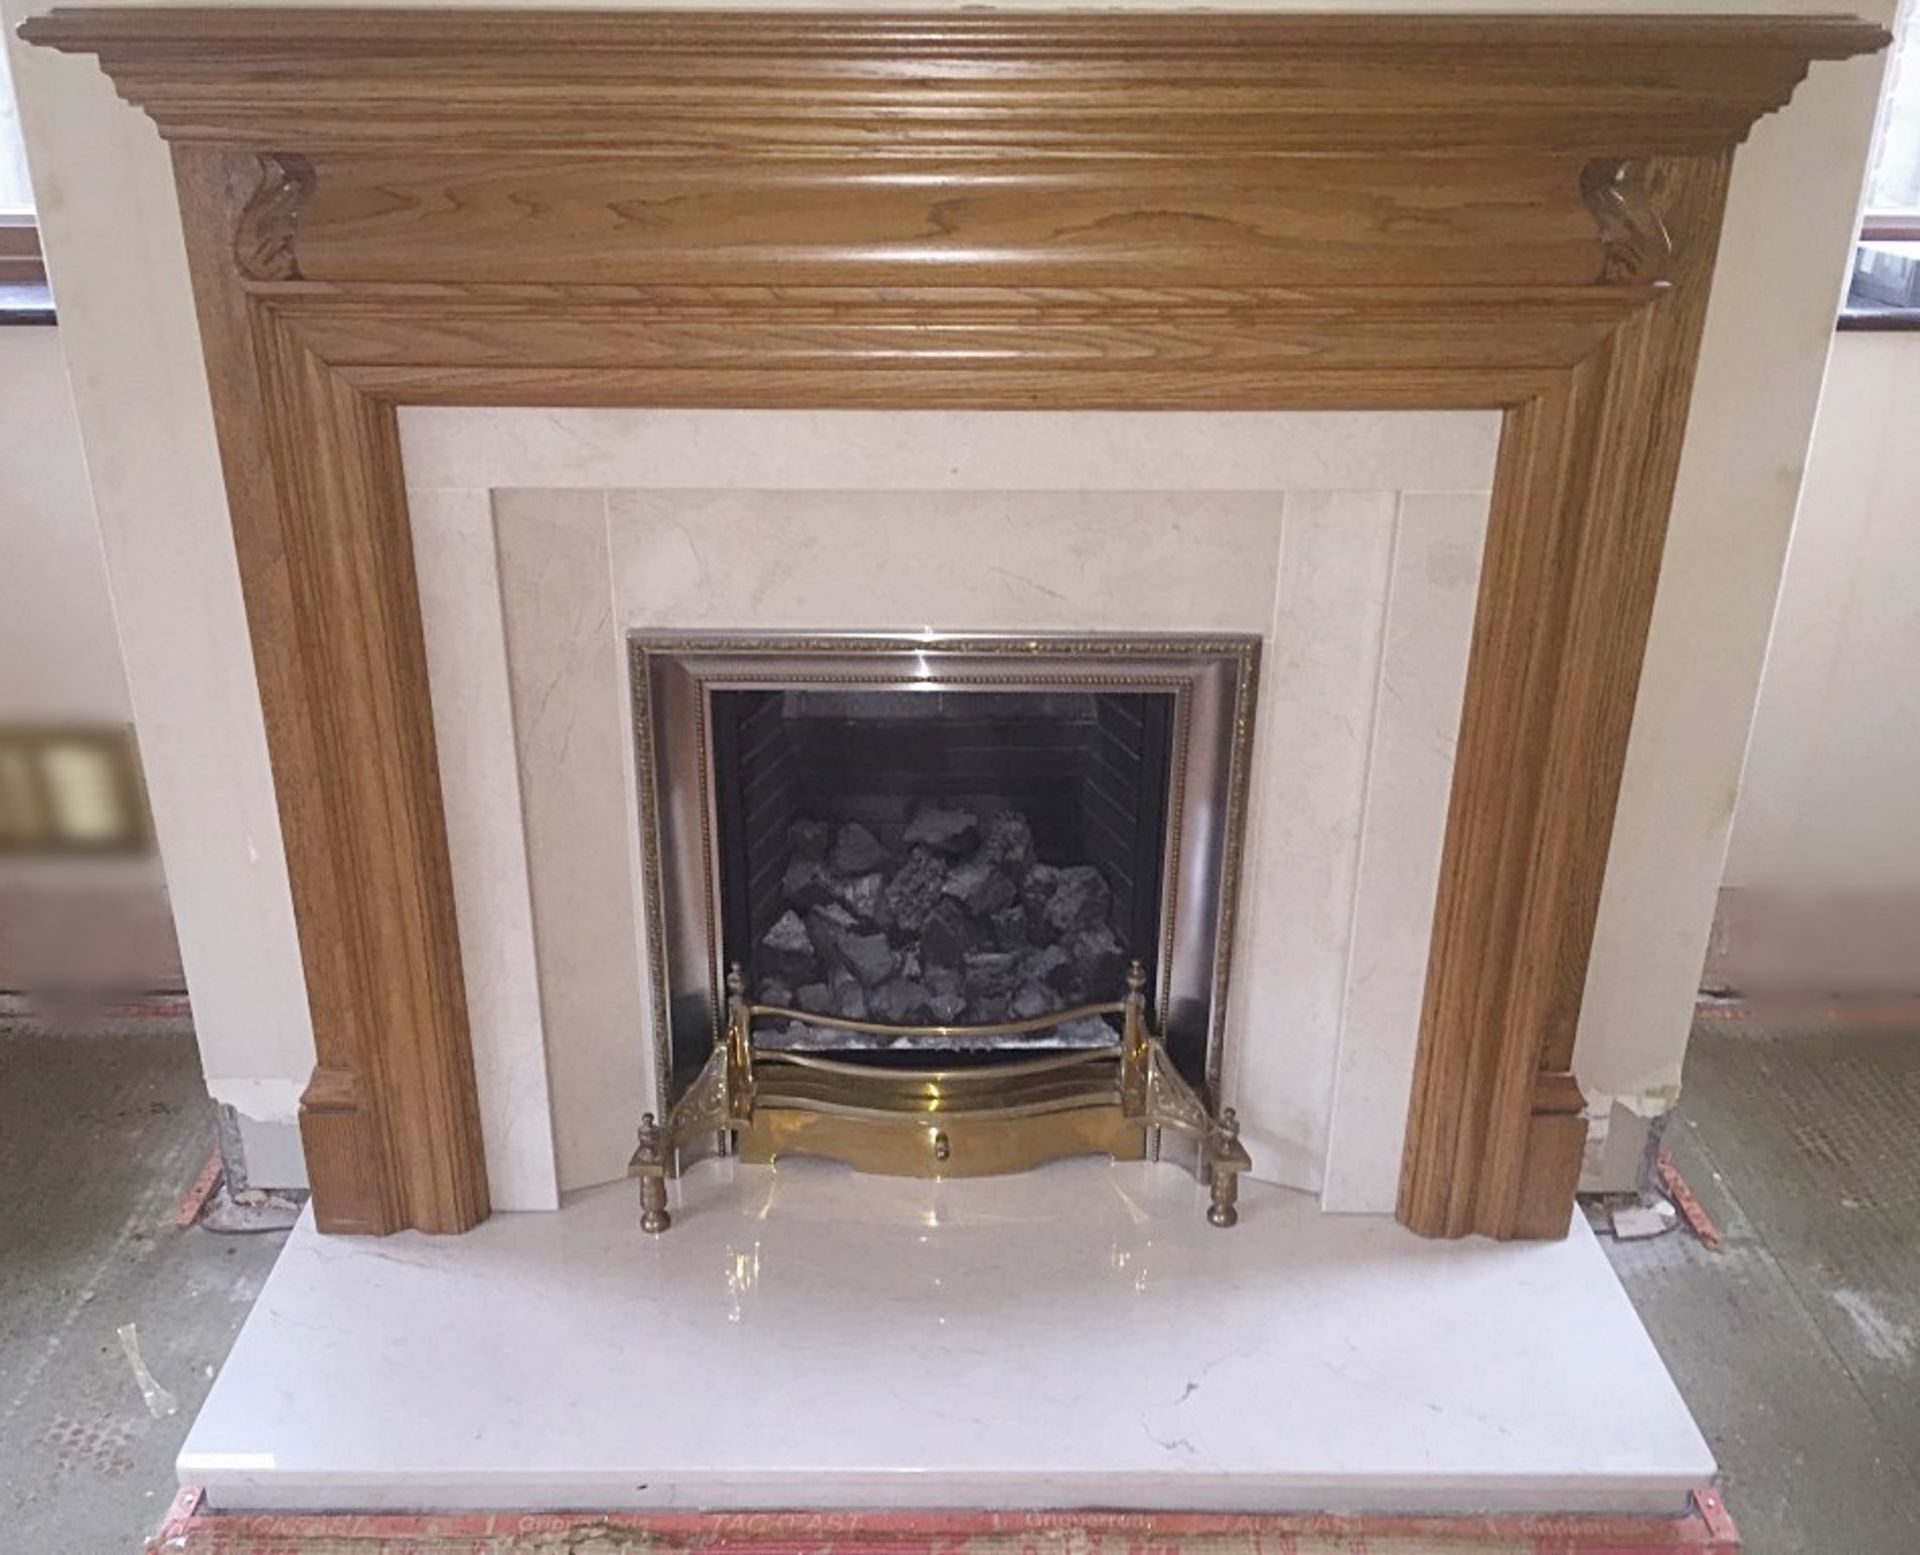 1 x Fire With Oak Surround, Marble Back Panel And Hearth - Dimensions: 137cm x Height 124cm – Hearth - Image 3 of 12